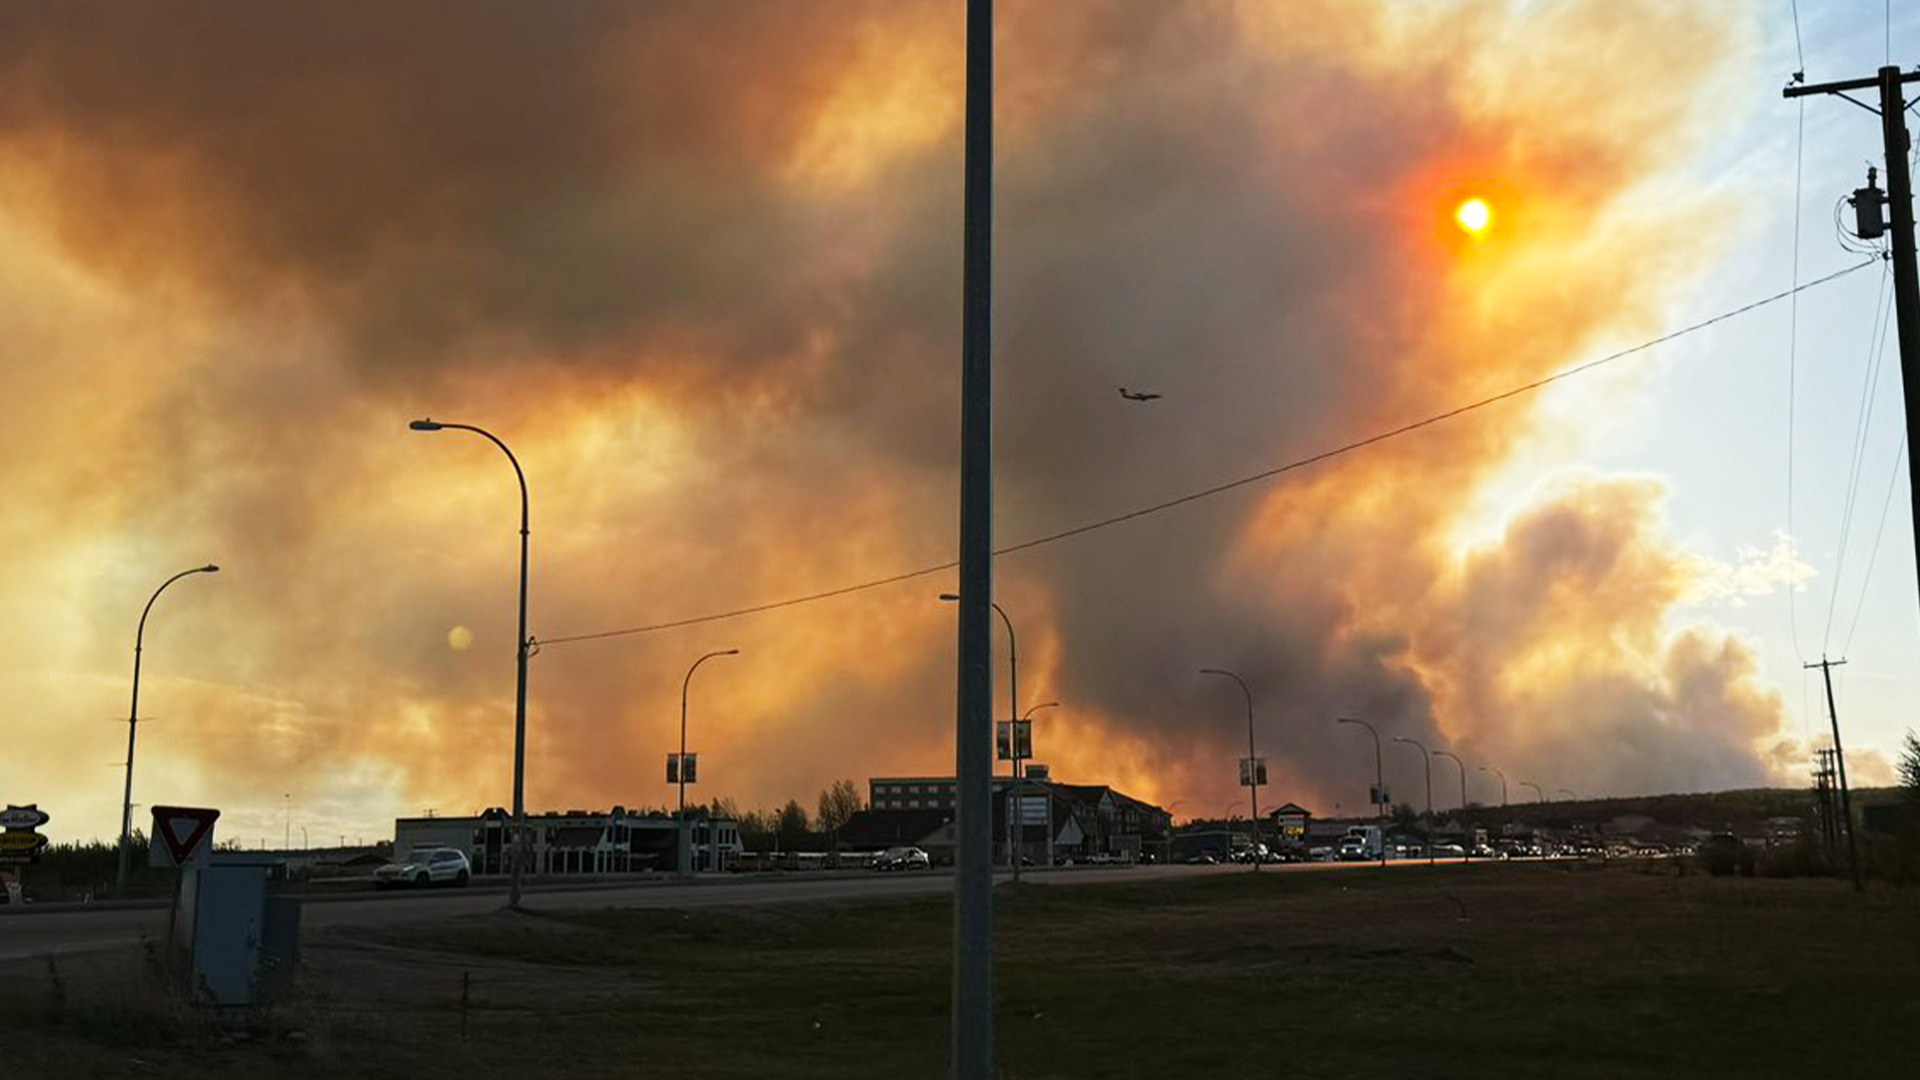 Thousands face potential evacuations as wildfires continue to burn across Canada